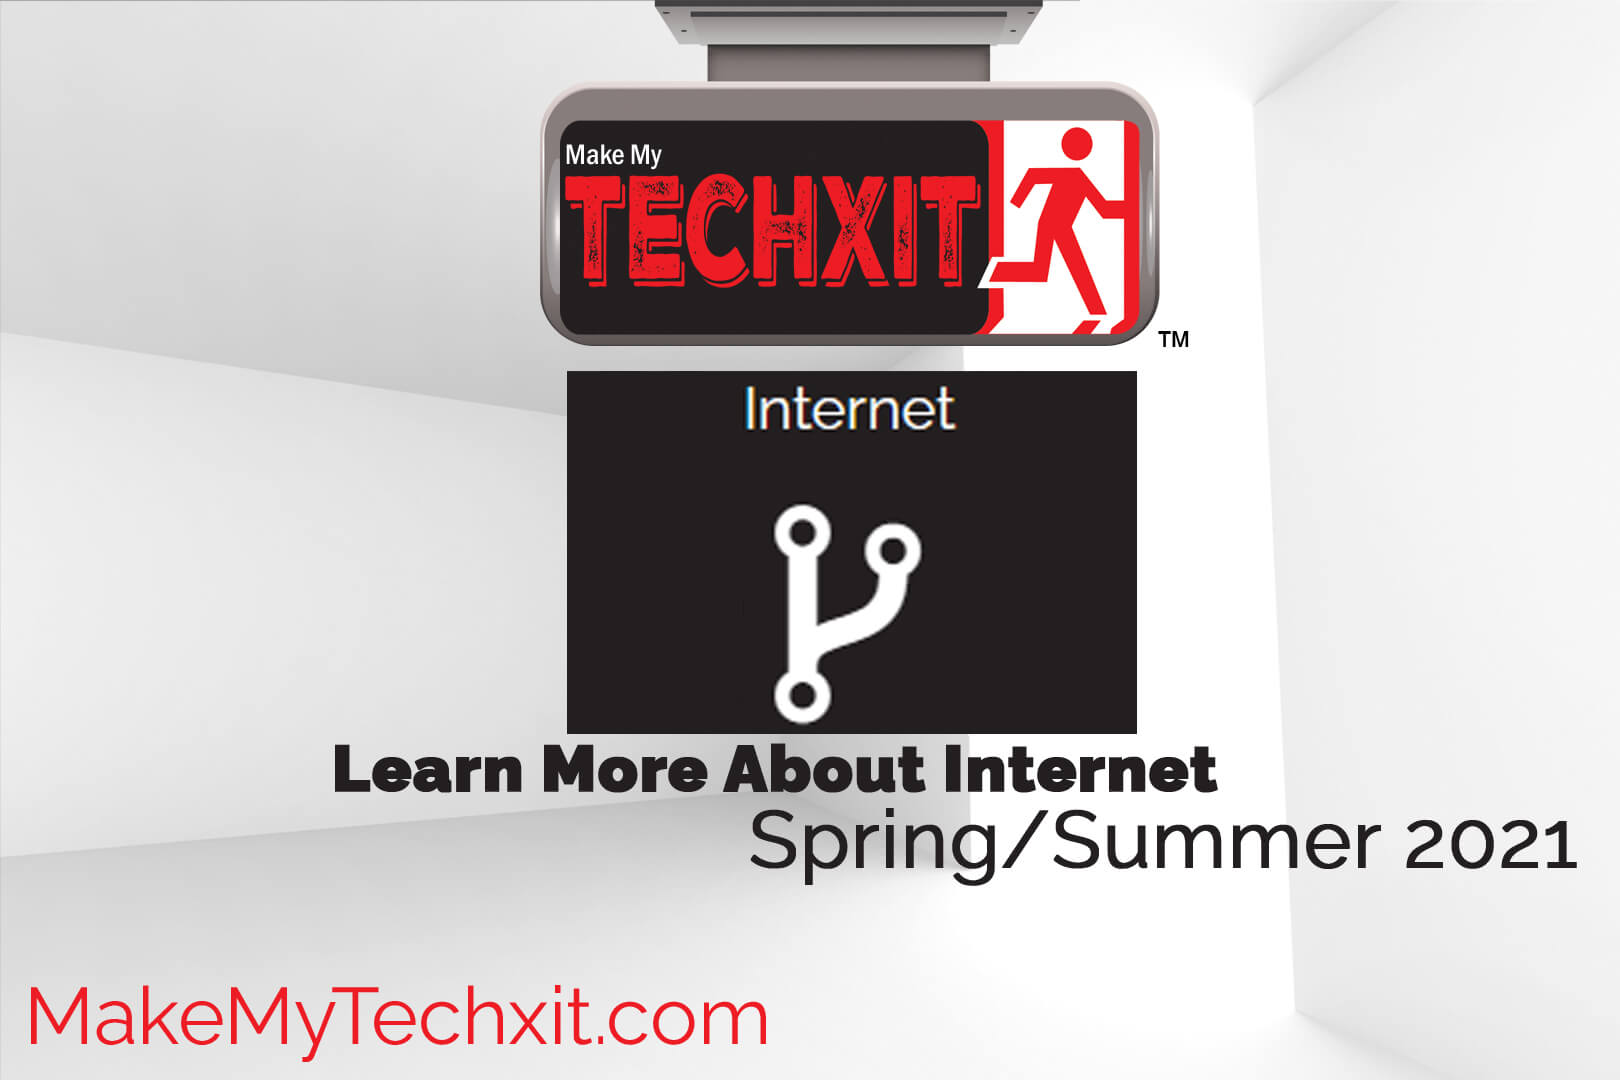 https://www.makemytechxit.com/learn-more-about-internet.php